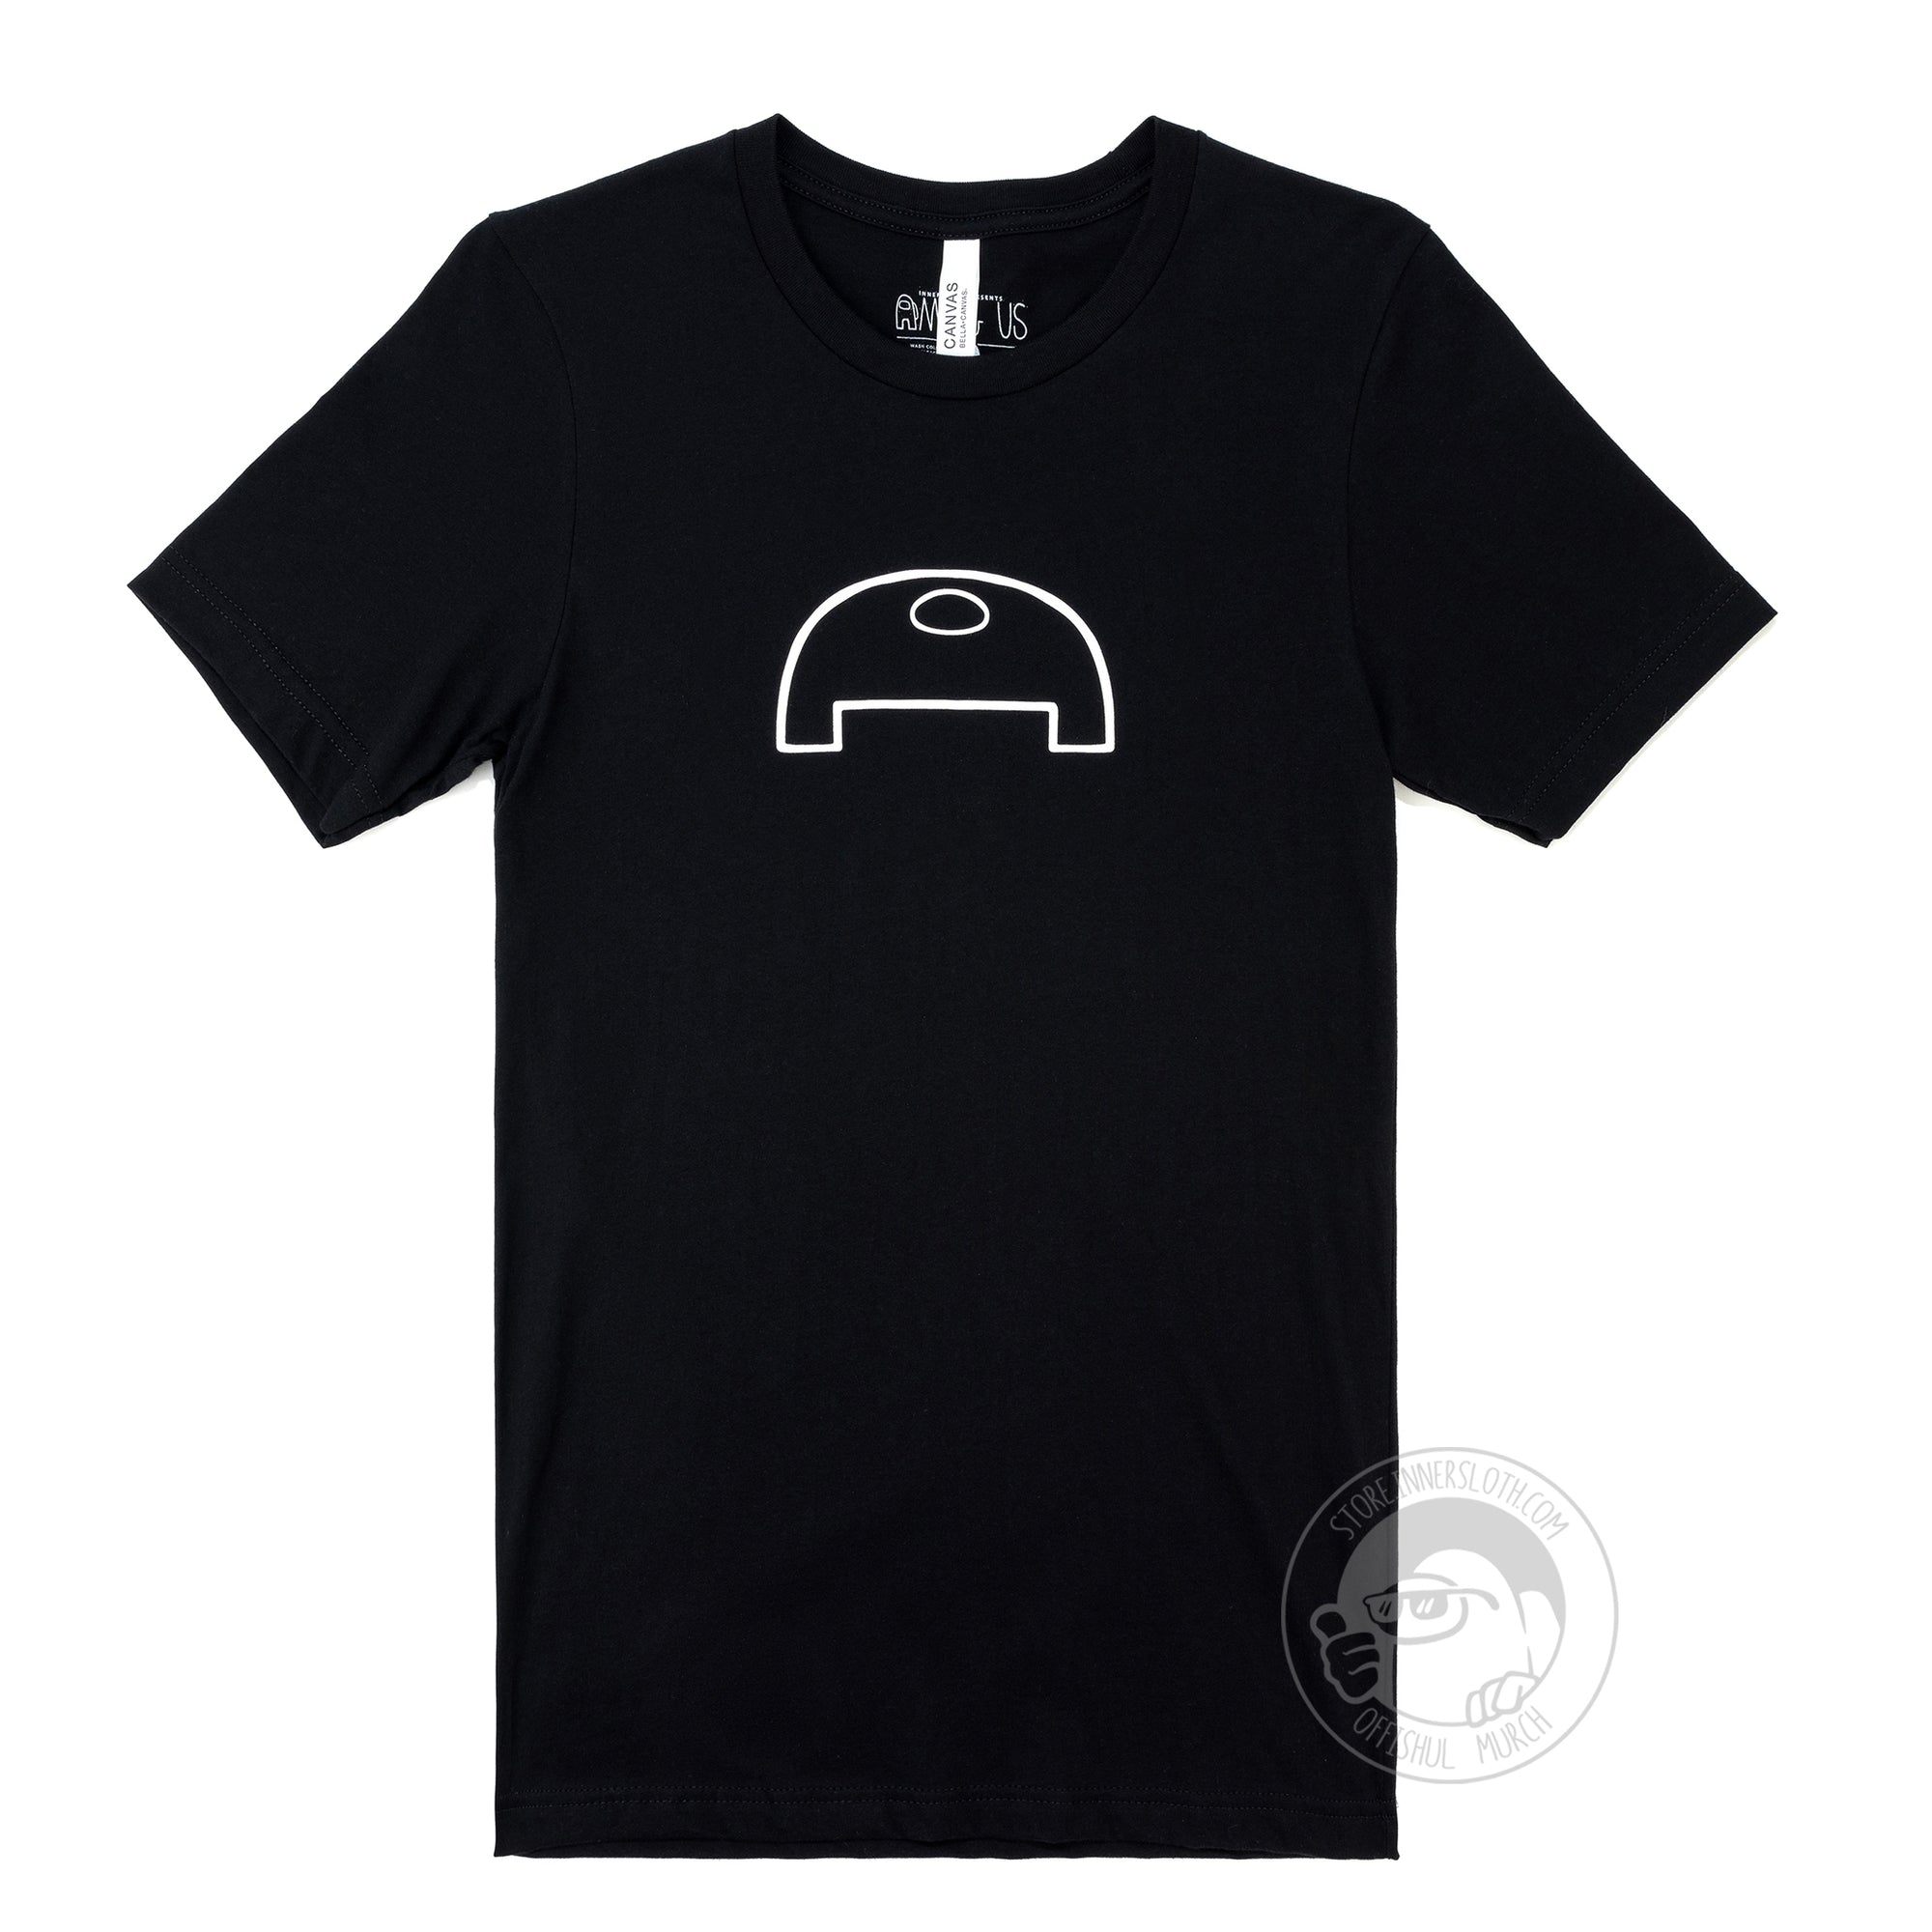 A flat lay photograph of the front of a black t-shirt. A wide crewmate is outlined in white in the center chest.